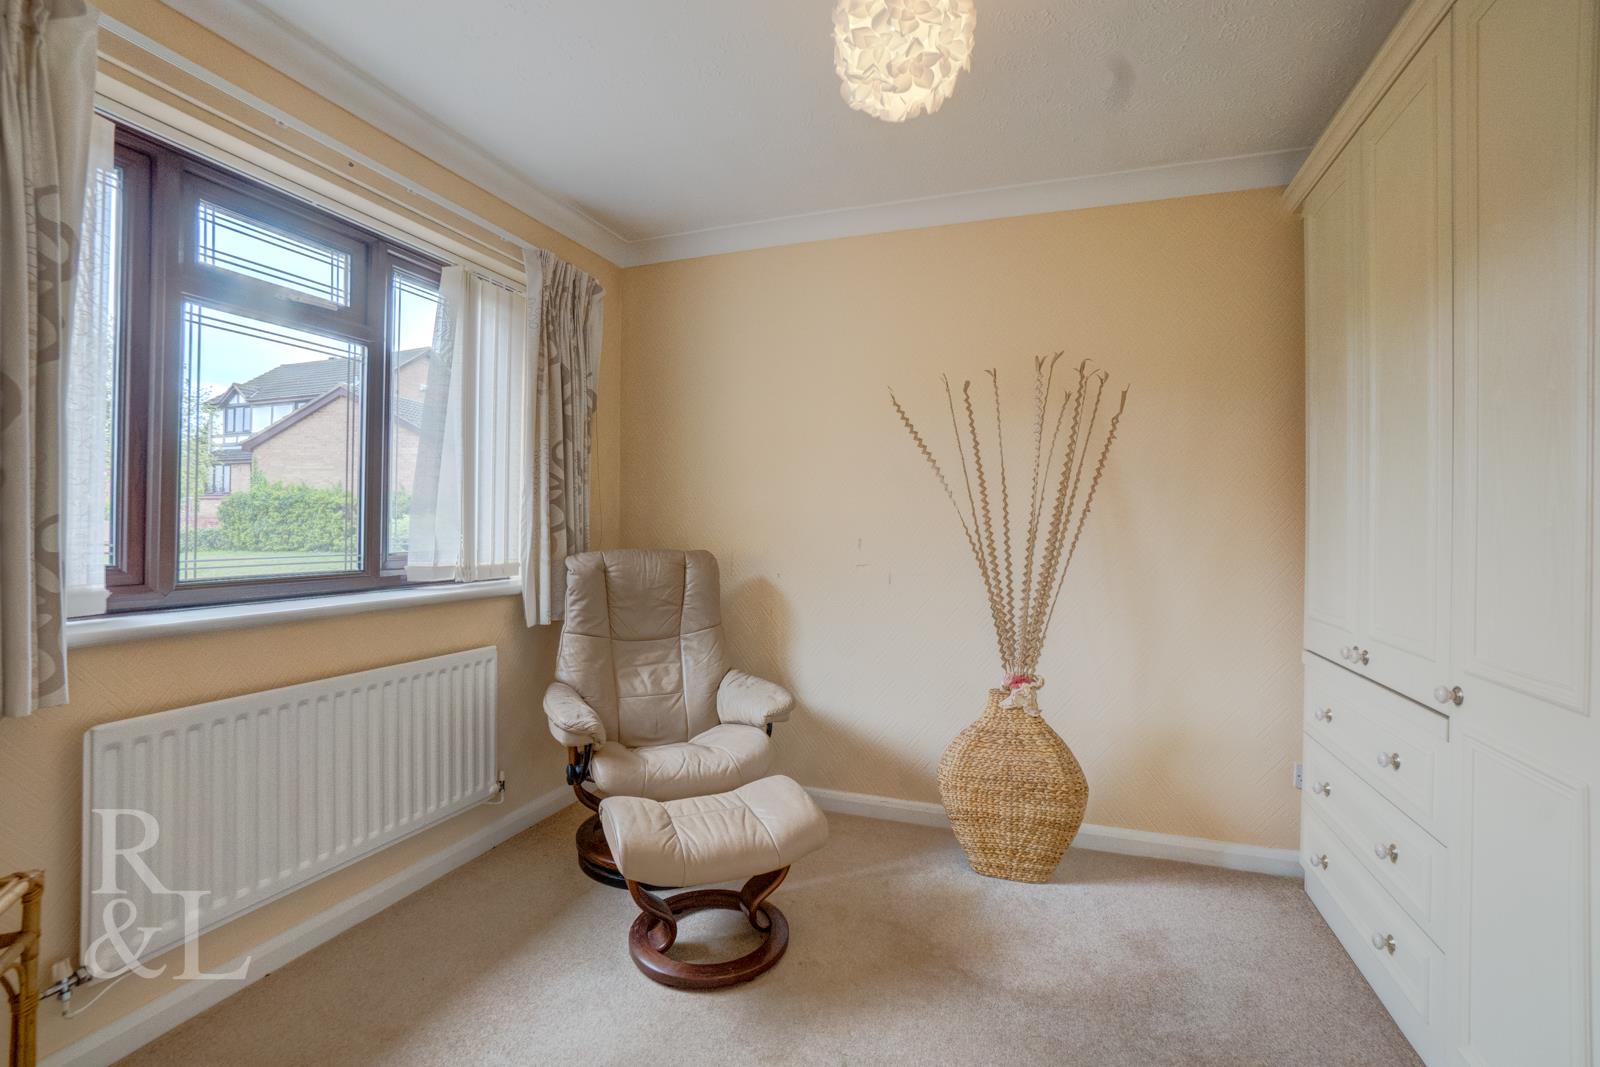 Property image for Willwell Drive, West Bridgford, Nottingham